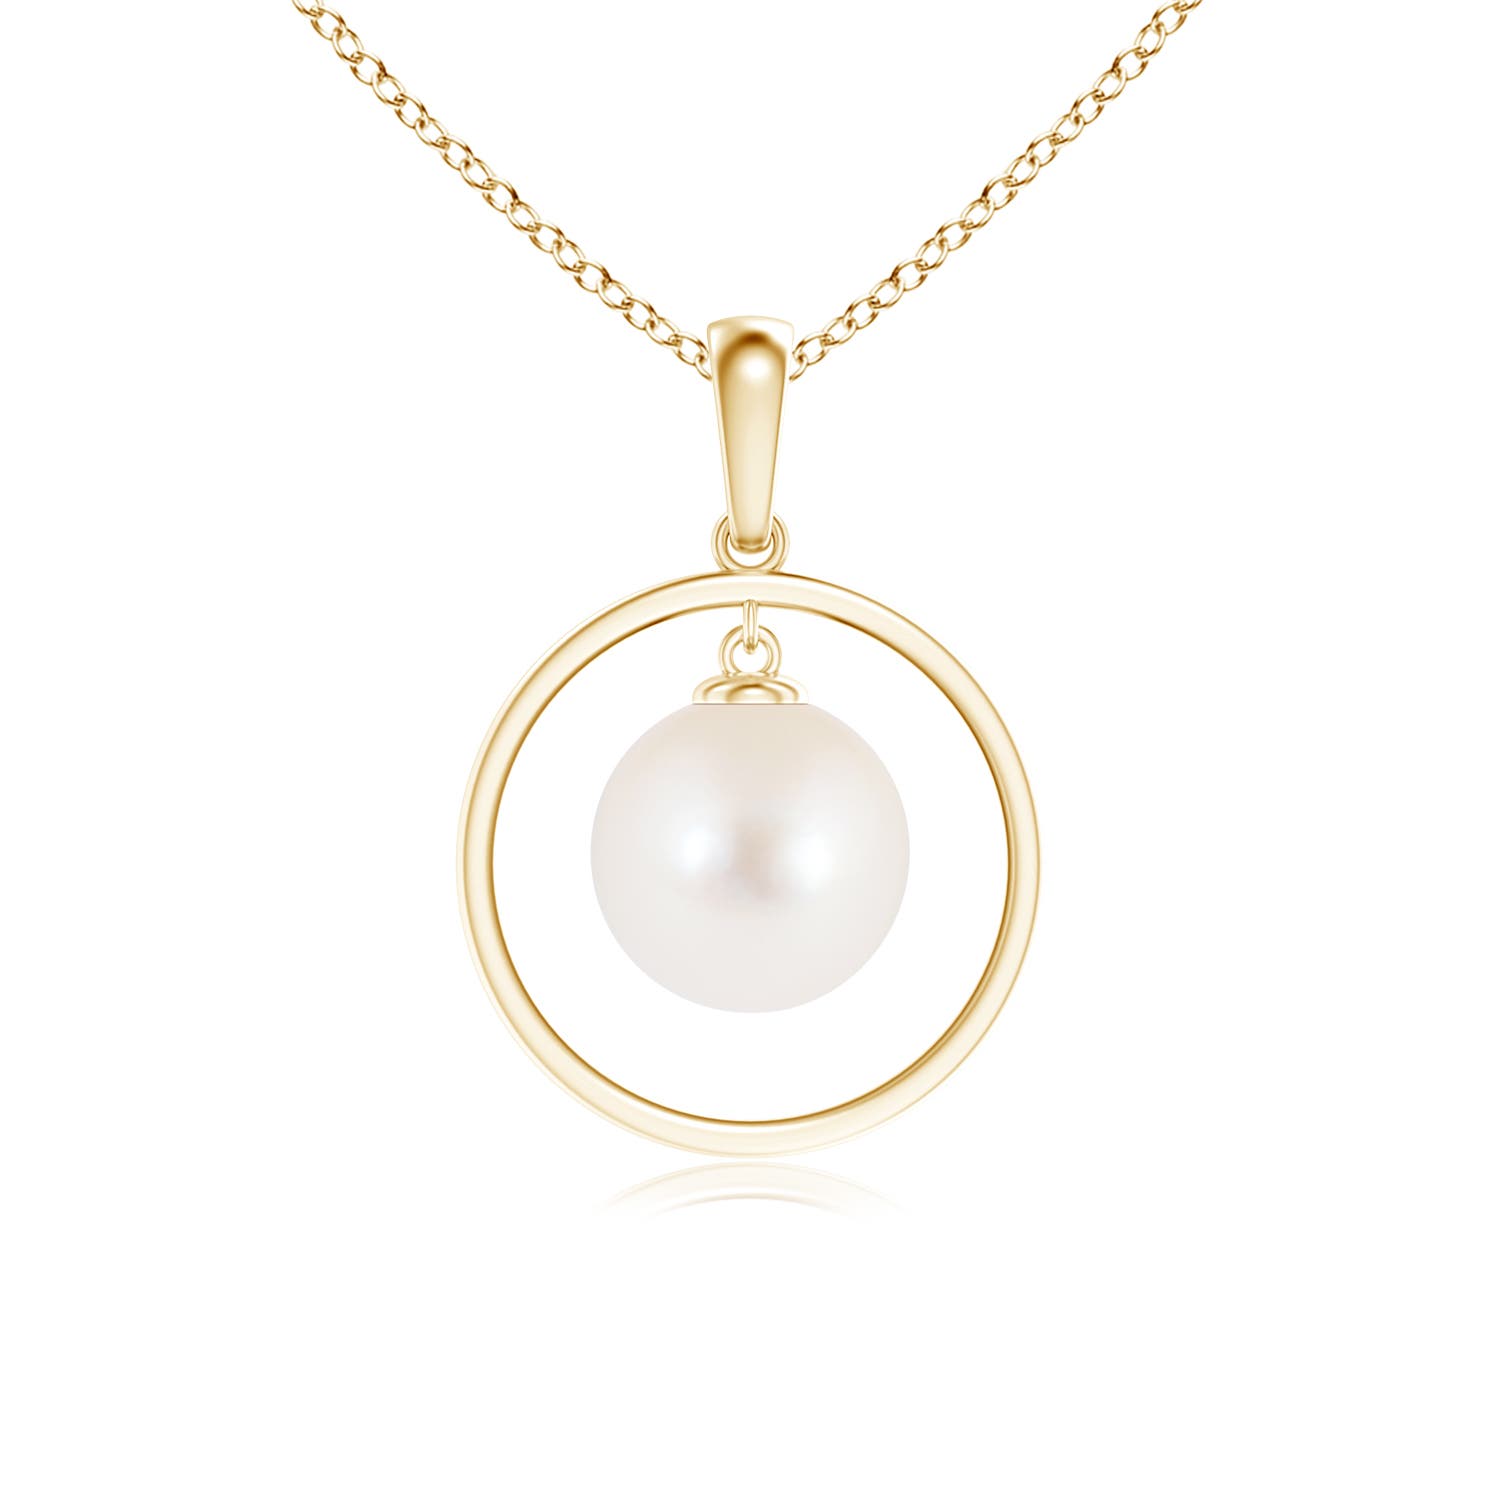 AAA - Freshwater Cultured Pearl / 3.7 CT / 14 KT Yellow Gold